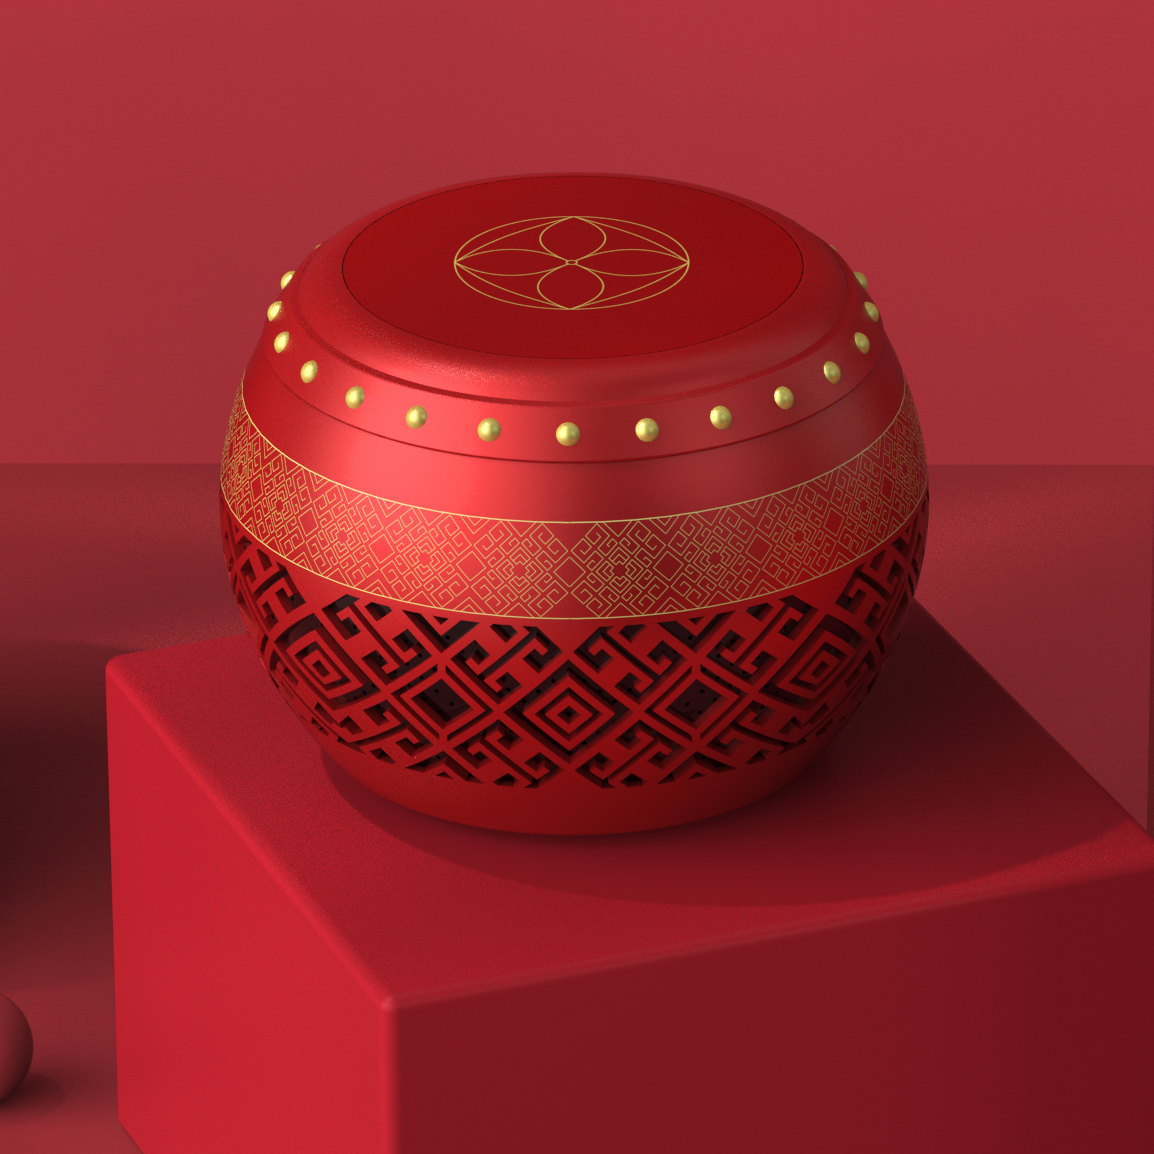 The Impression of Jingxi Intelligent Bluetooth Speaker of Lichuang Guangxi